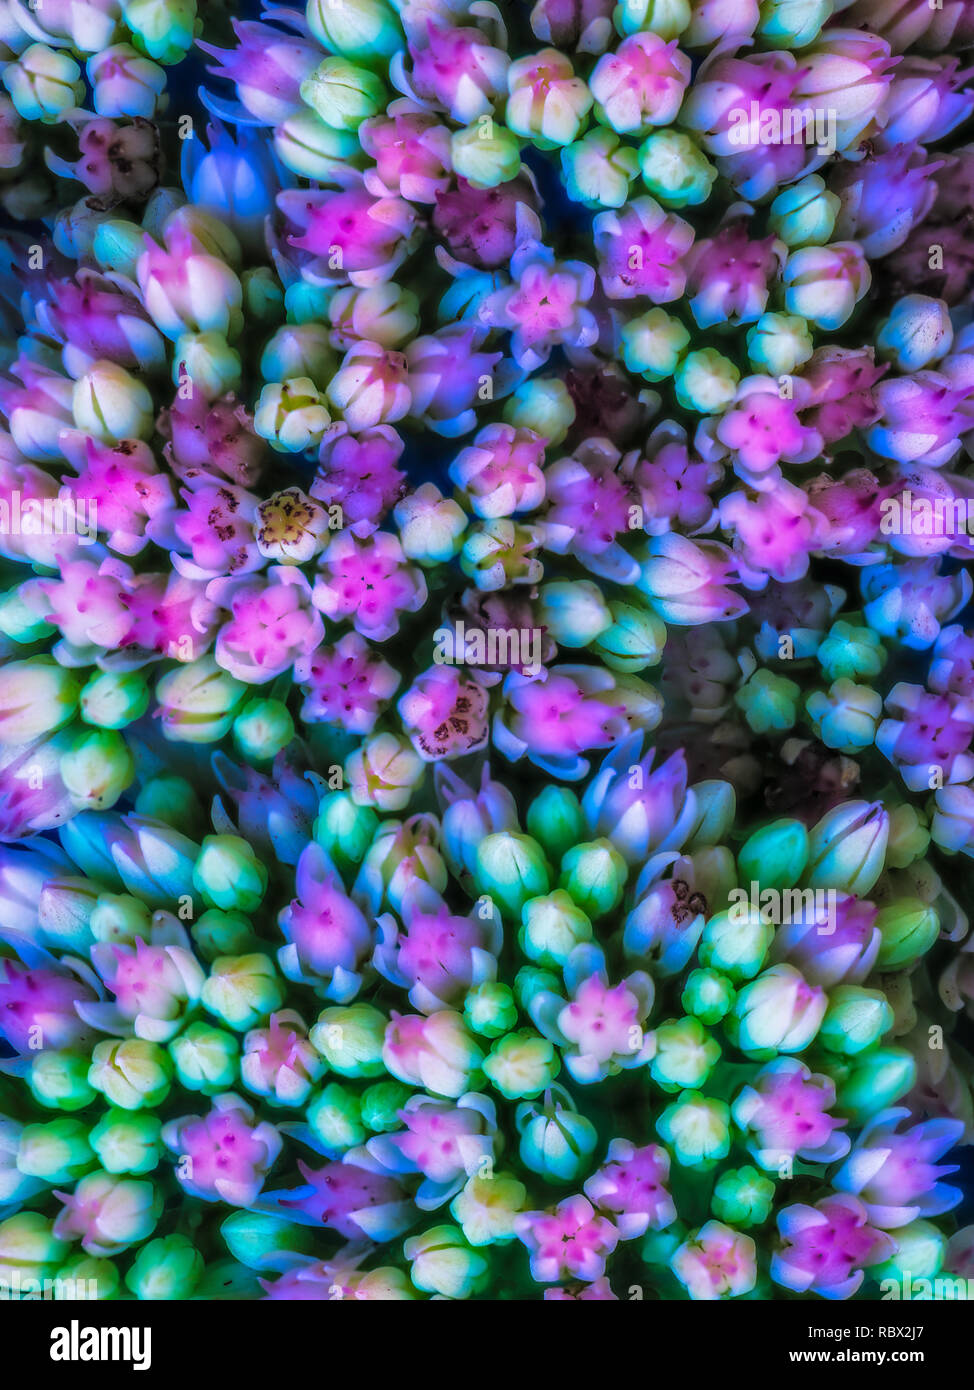 Fine art still life surrealistic color macro of evolving buds from a stonecrop plant in painting style Stock Photo